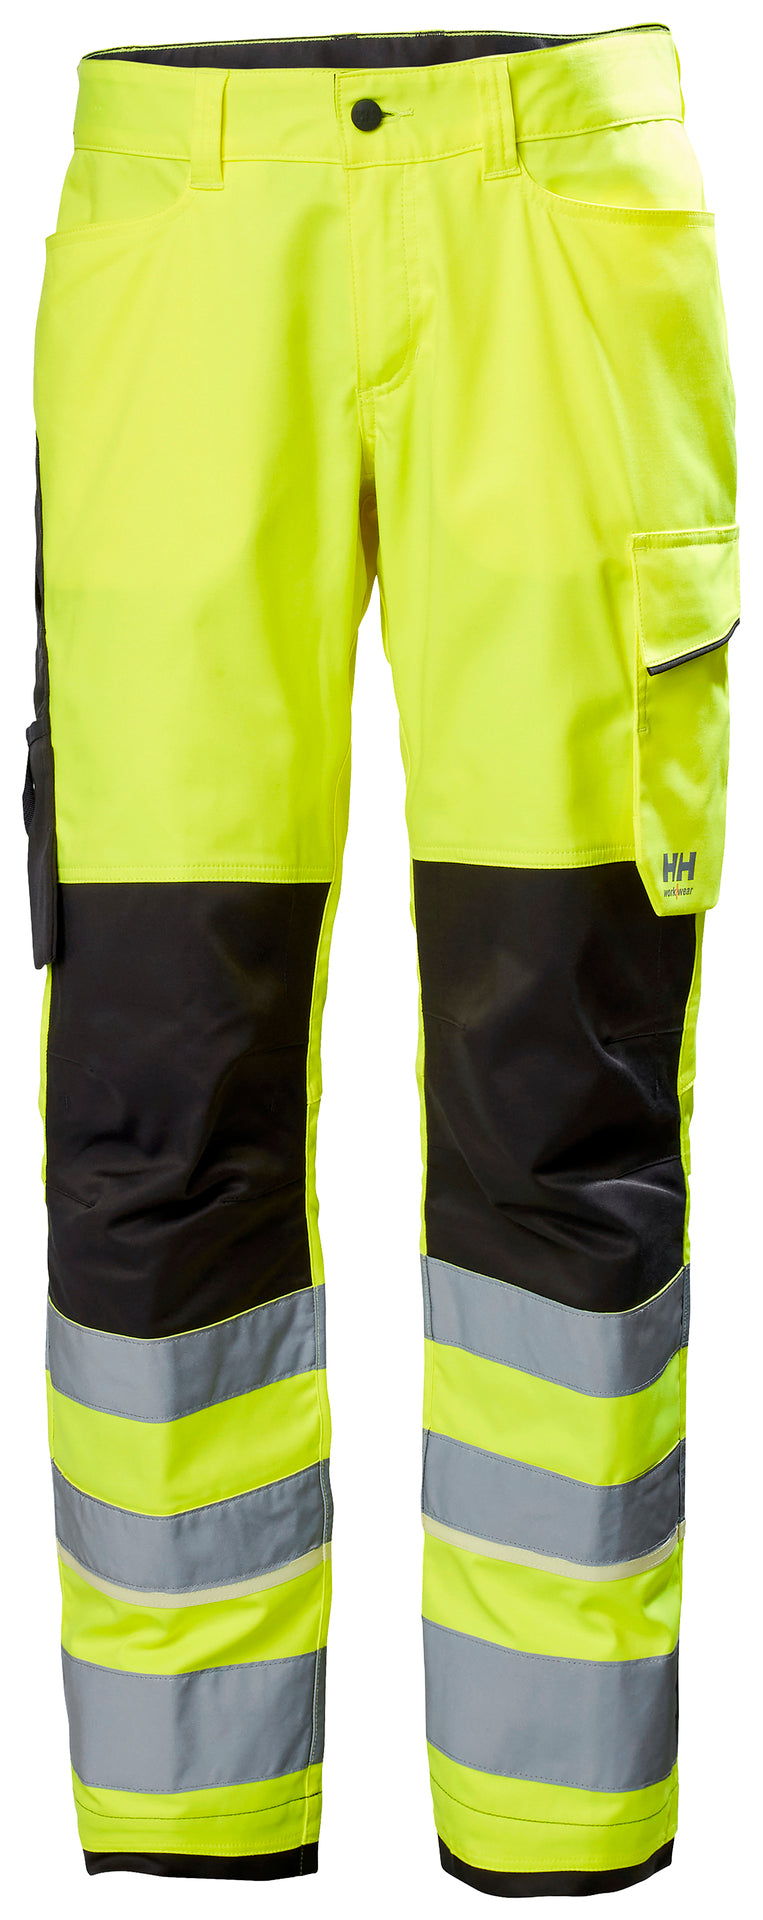 Helly Hansen Uc-Me Work Trousers Cl2 - Yellow